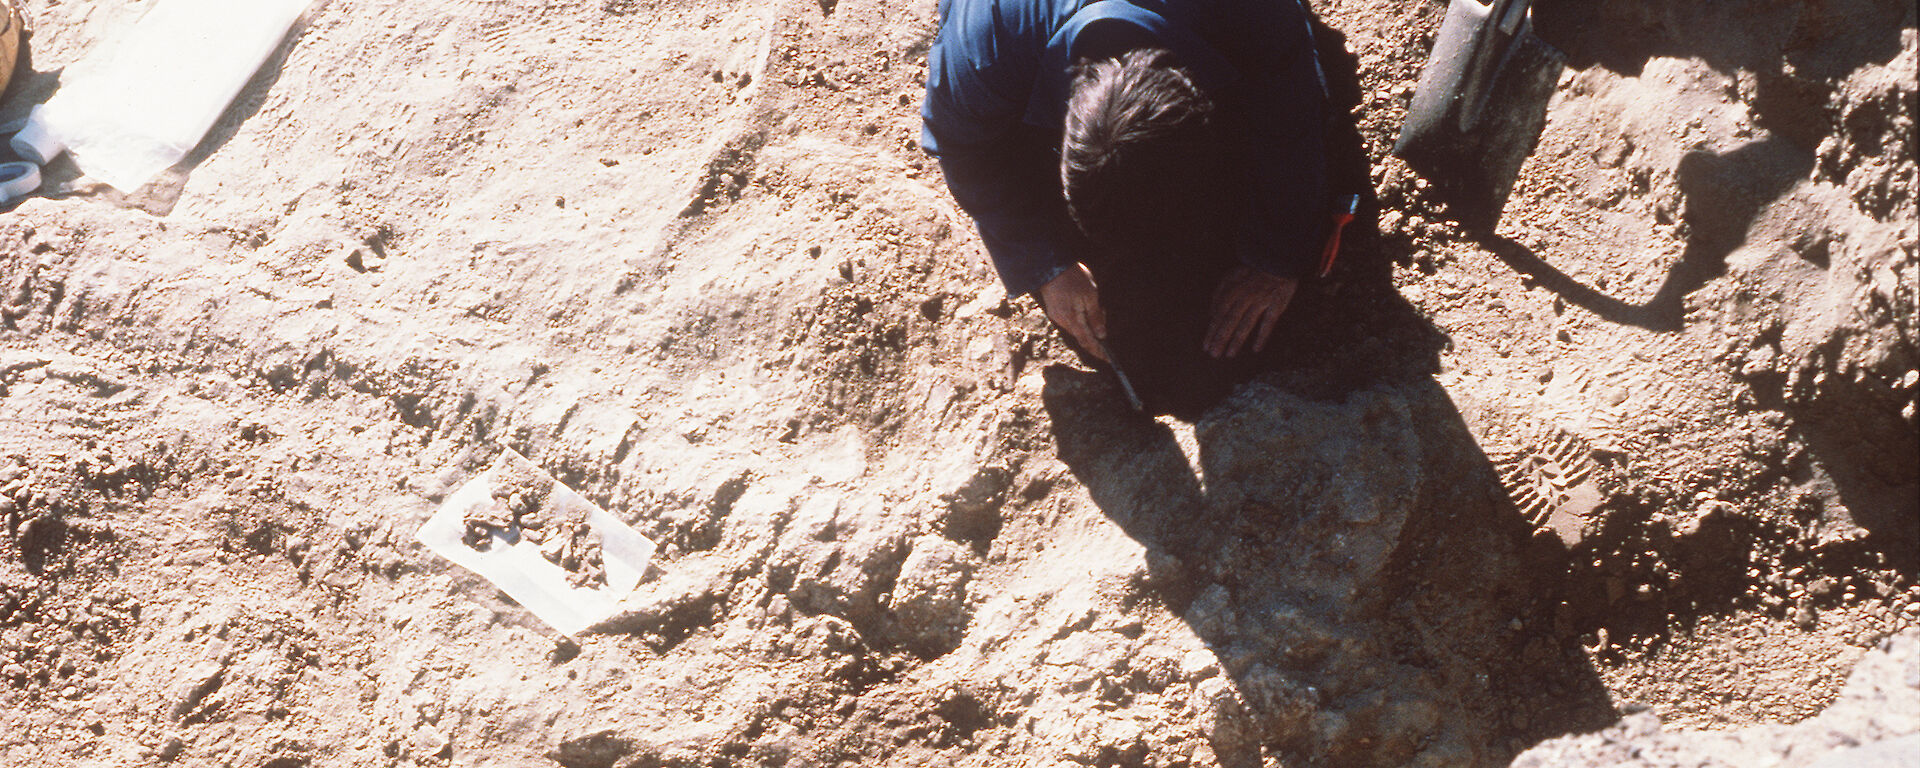 A scientist studies a fossil dolphin skeleton at Marine Plain in the Vestfold Hills